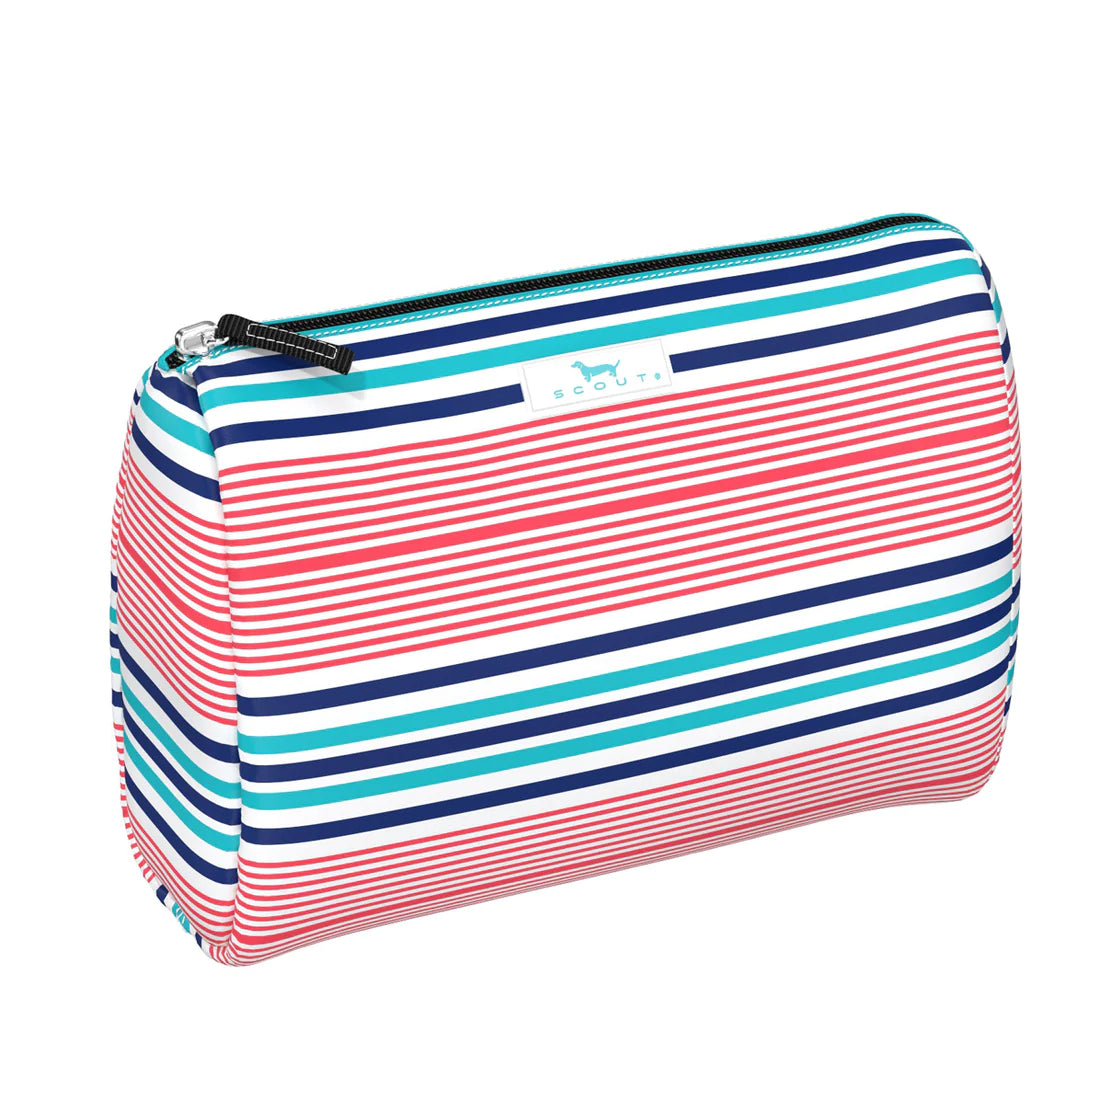 Scout Packin' Heat Makeup Bag - What The Deck